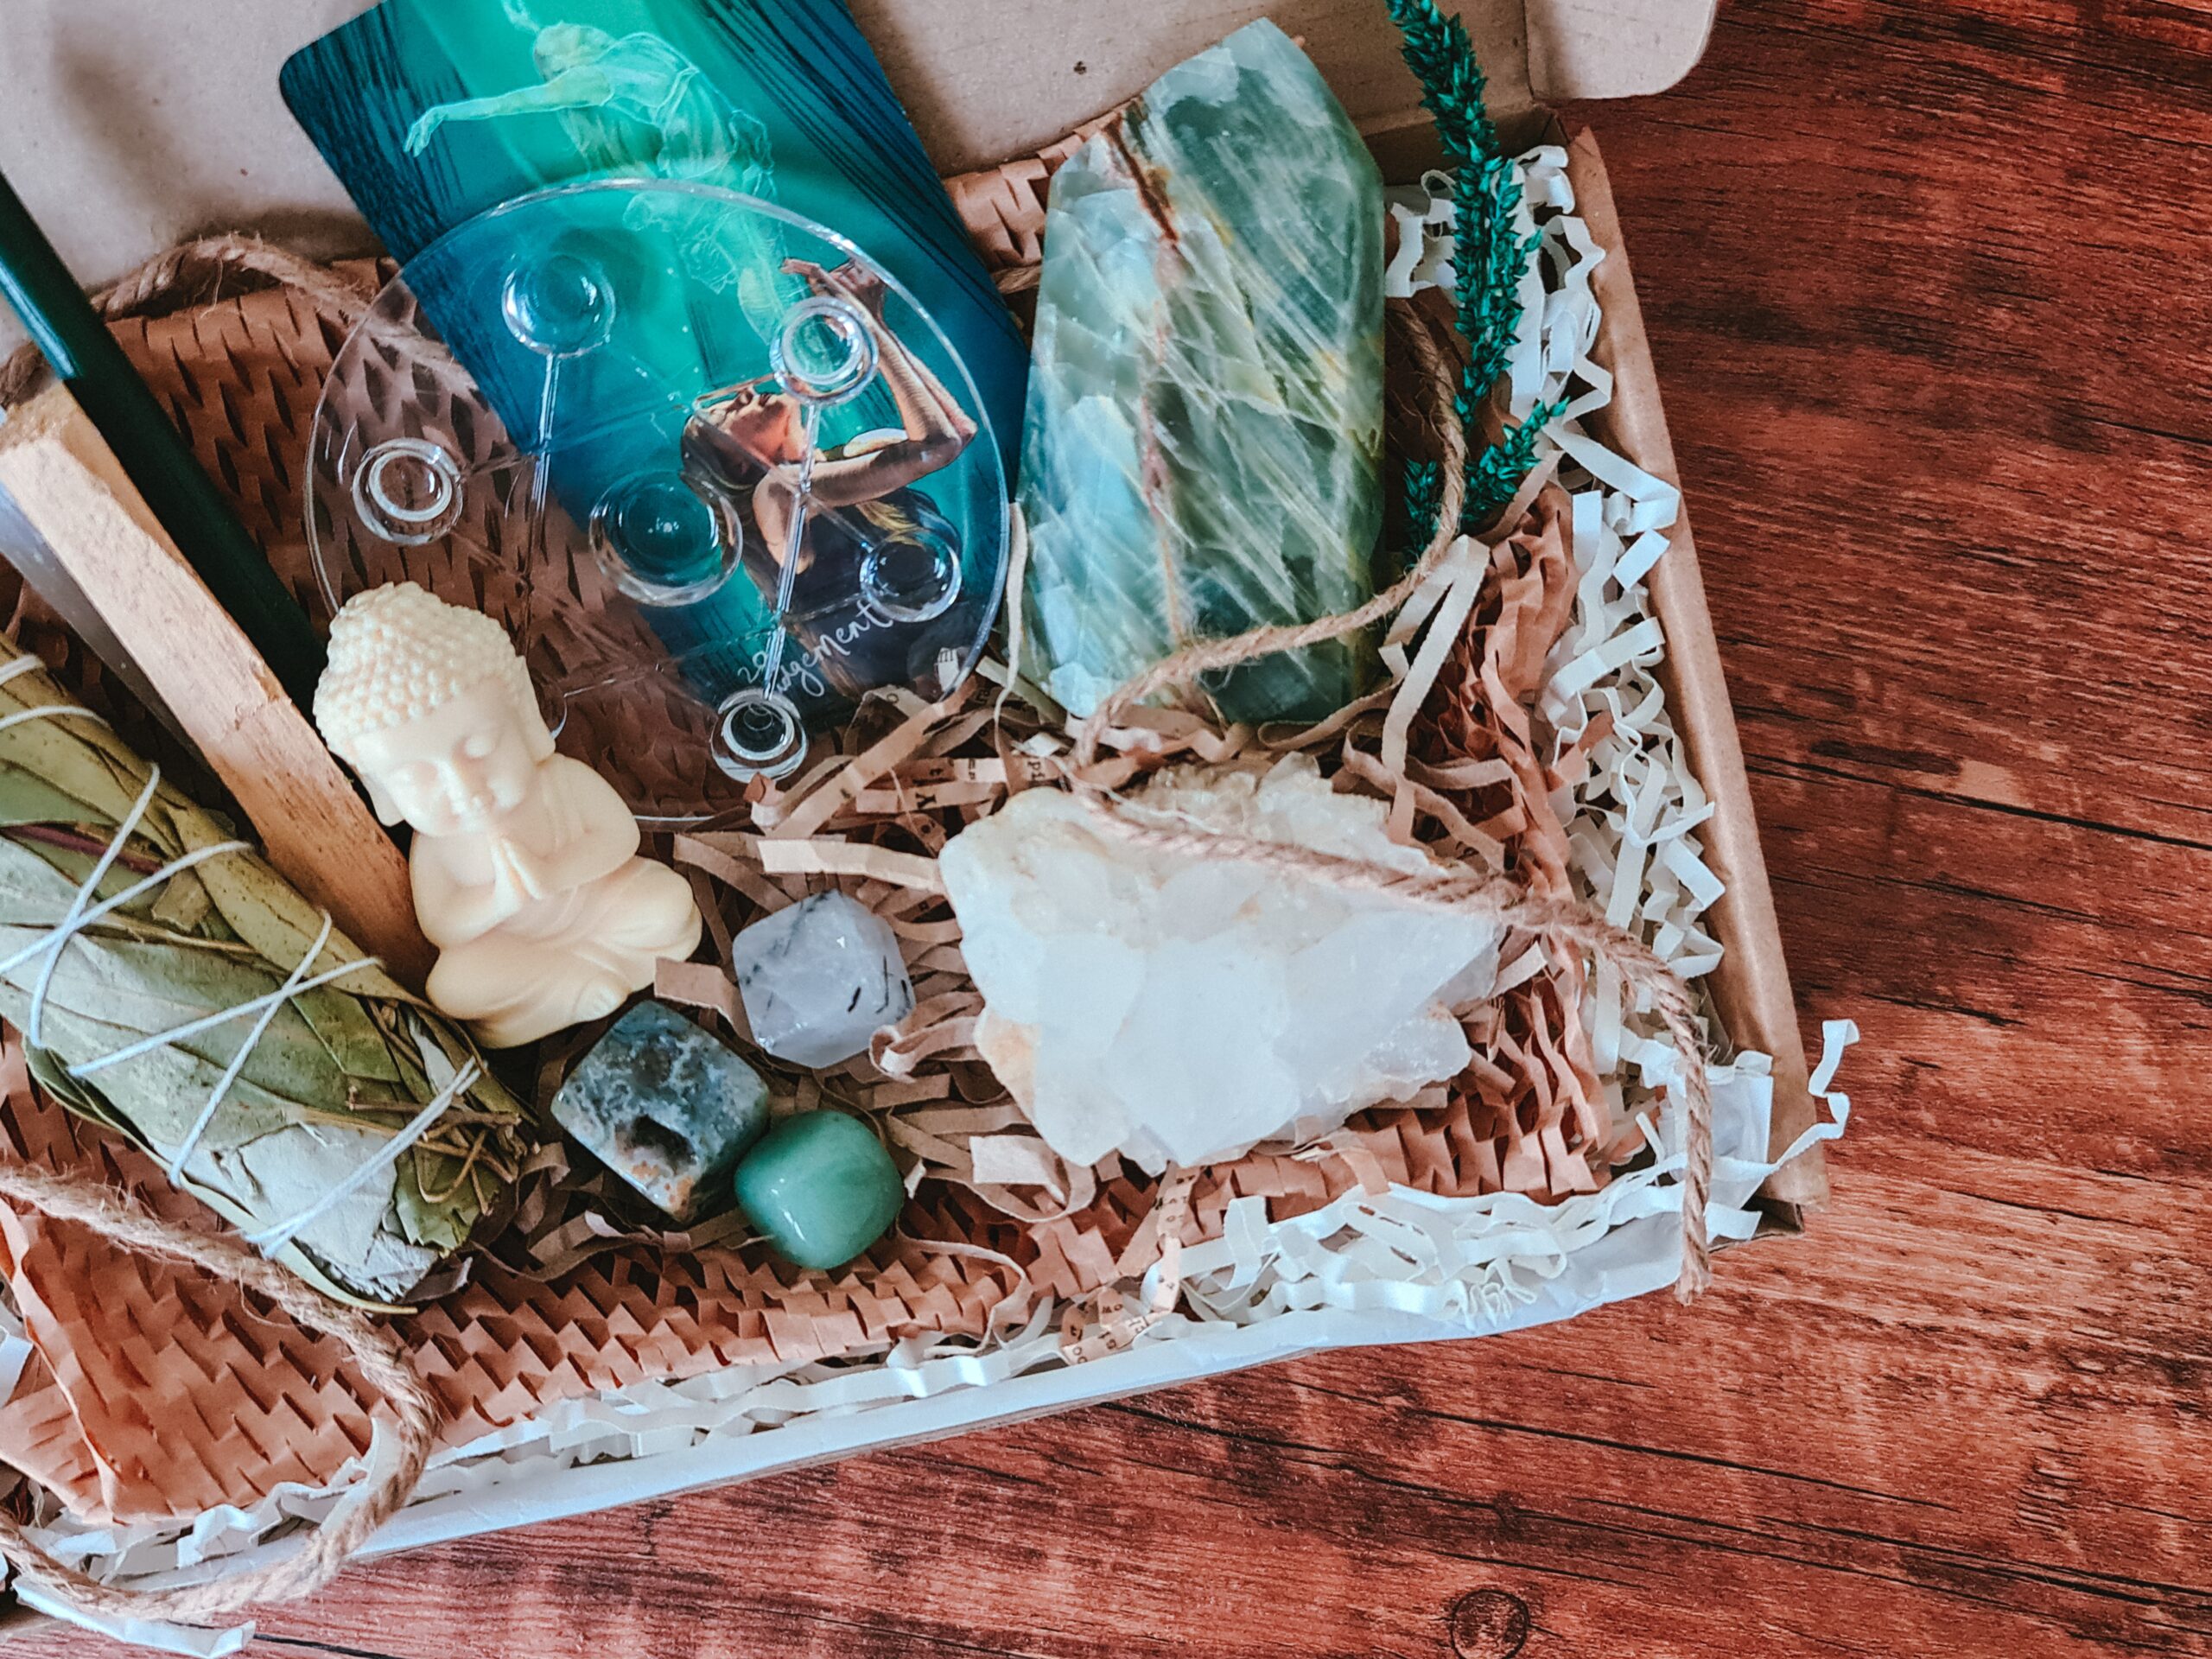 Where To Buy Pre-Made Gift Baskets Online